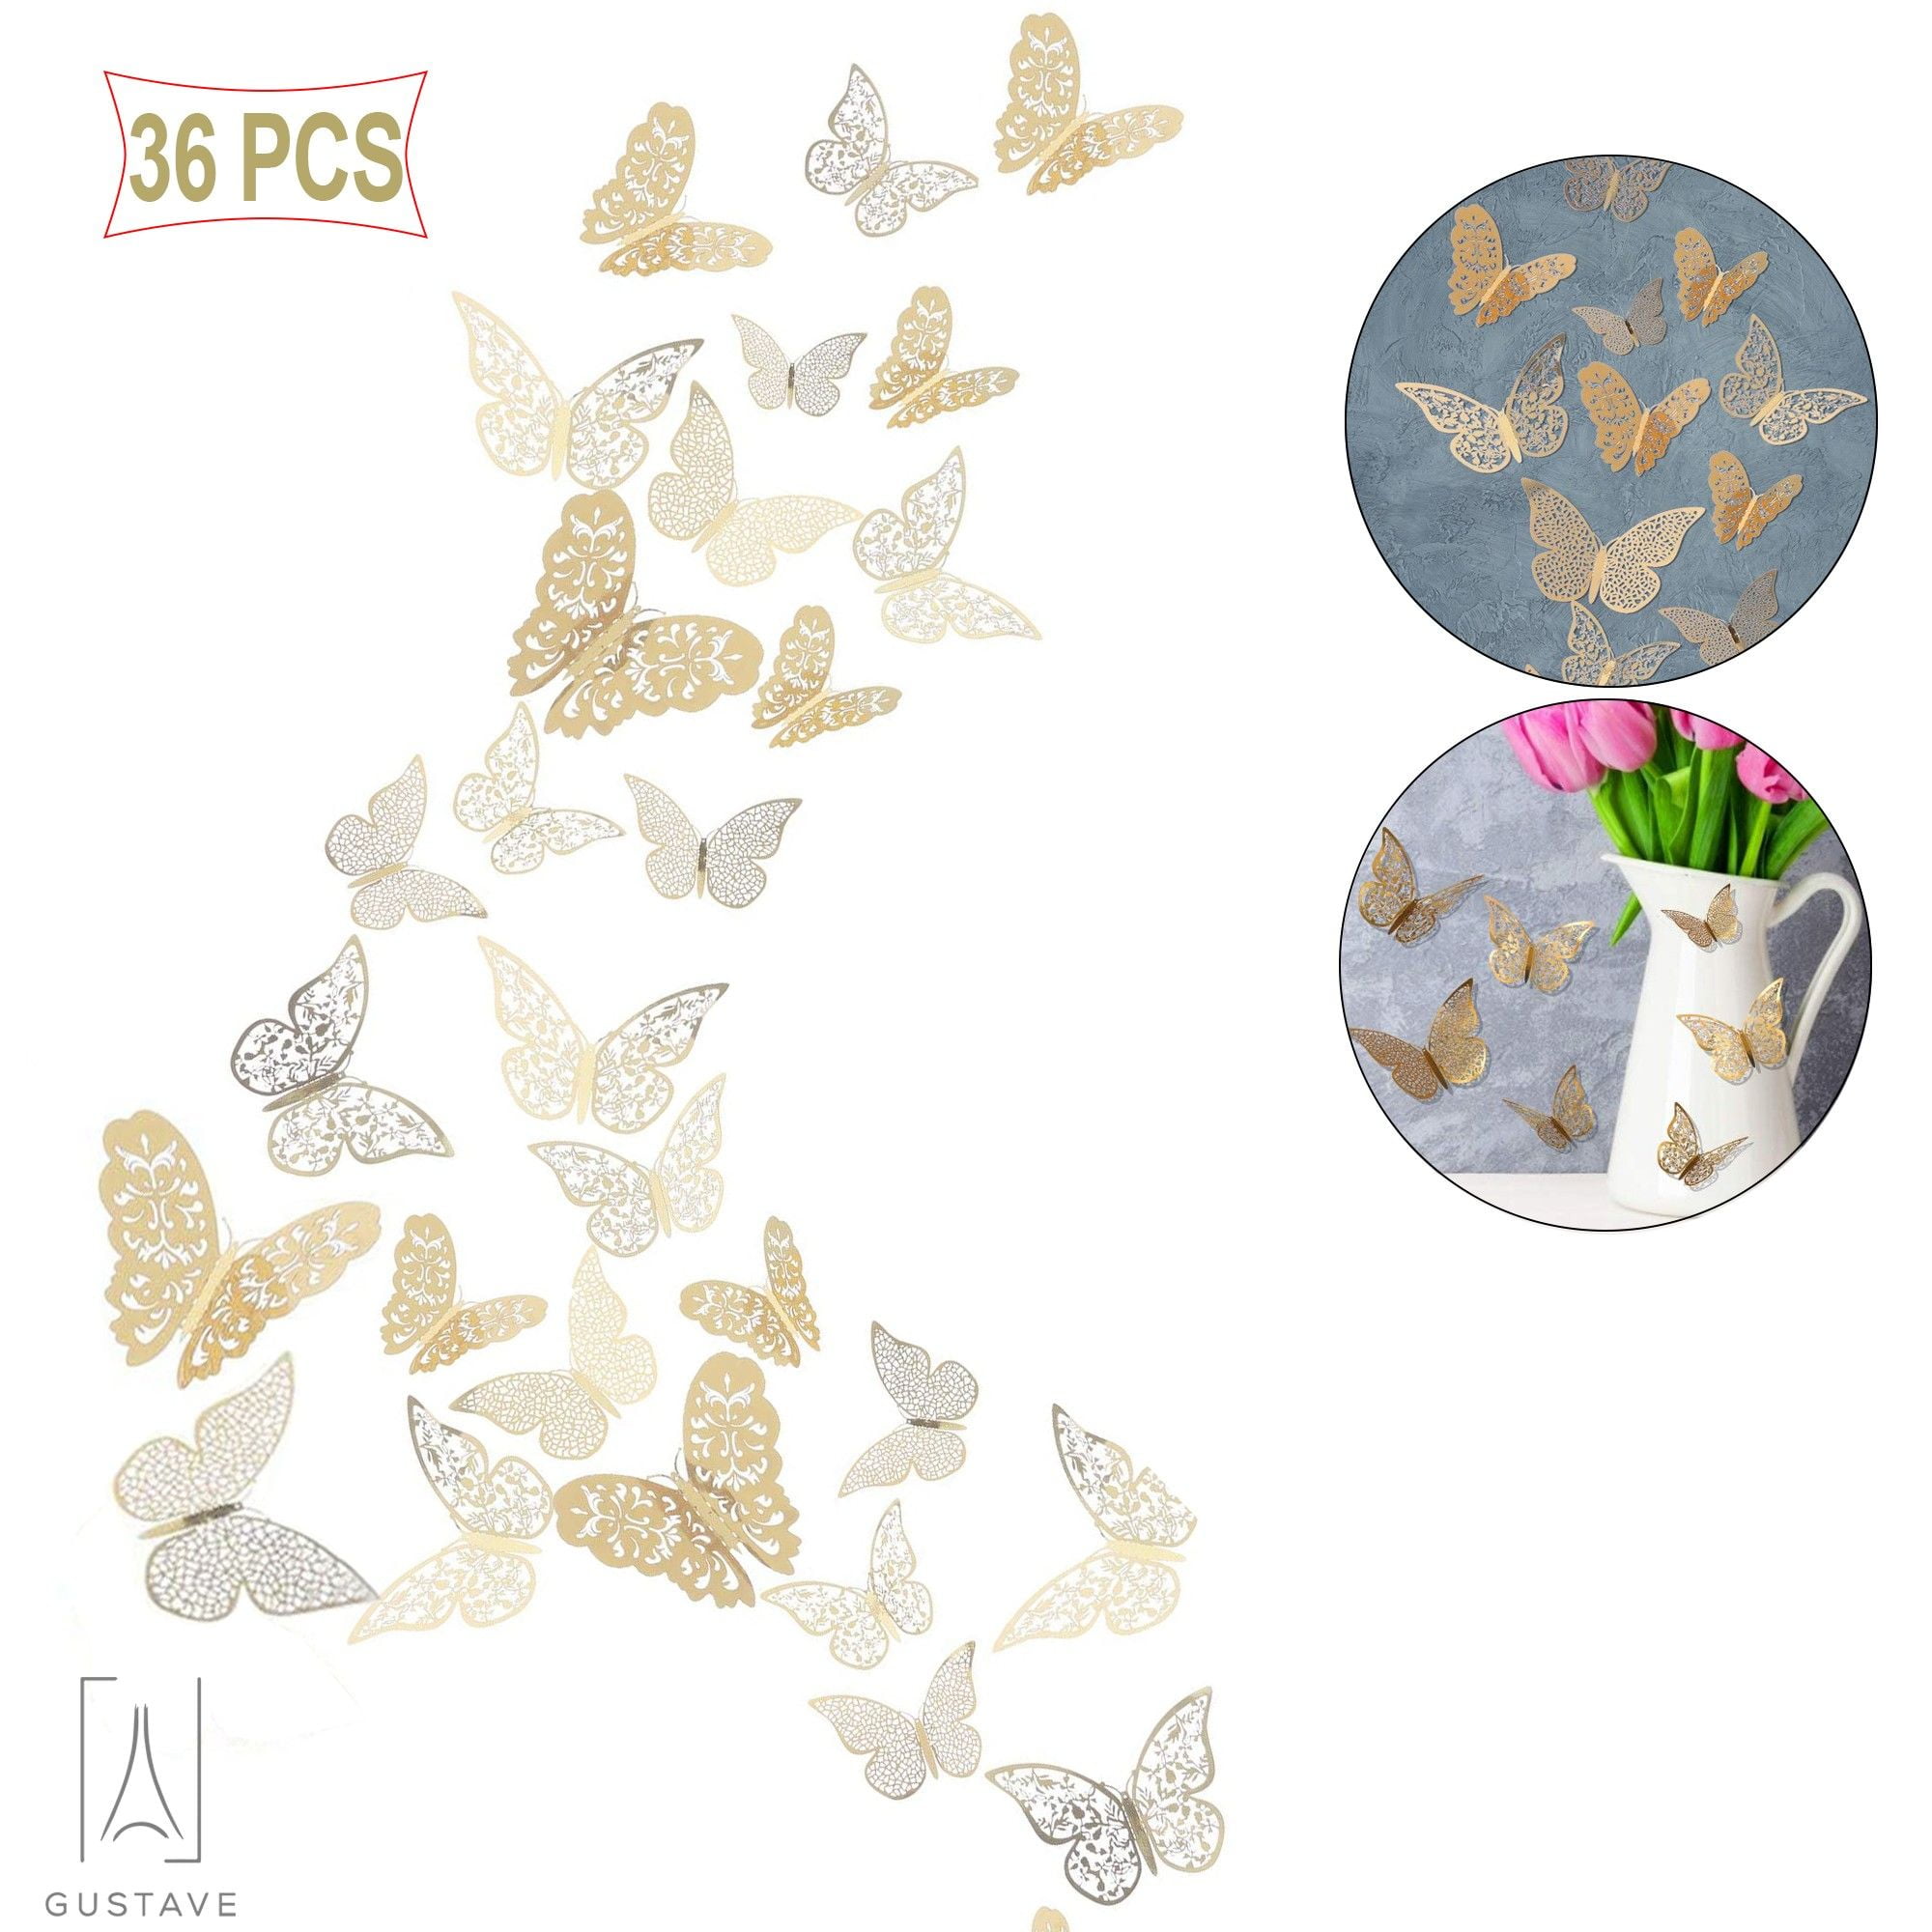 3D Teal Butterfly Shining Metallic Glittering Paper Wall Decal Gadget Removable Mural Sticker Living Room Bedroom Sun Room Shop Window Nursery Decoration Theme Party